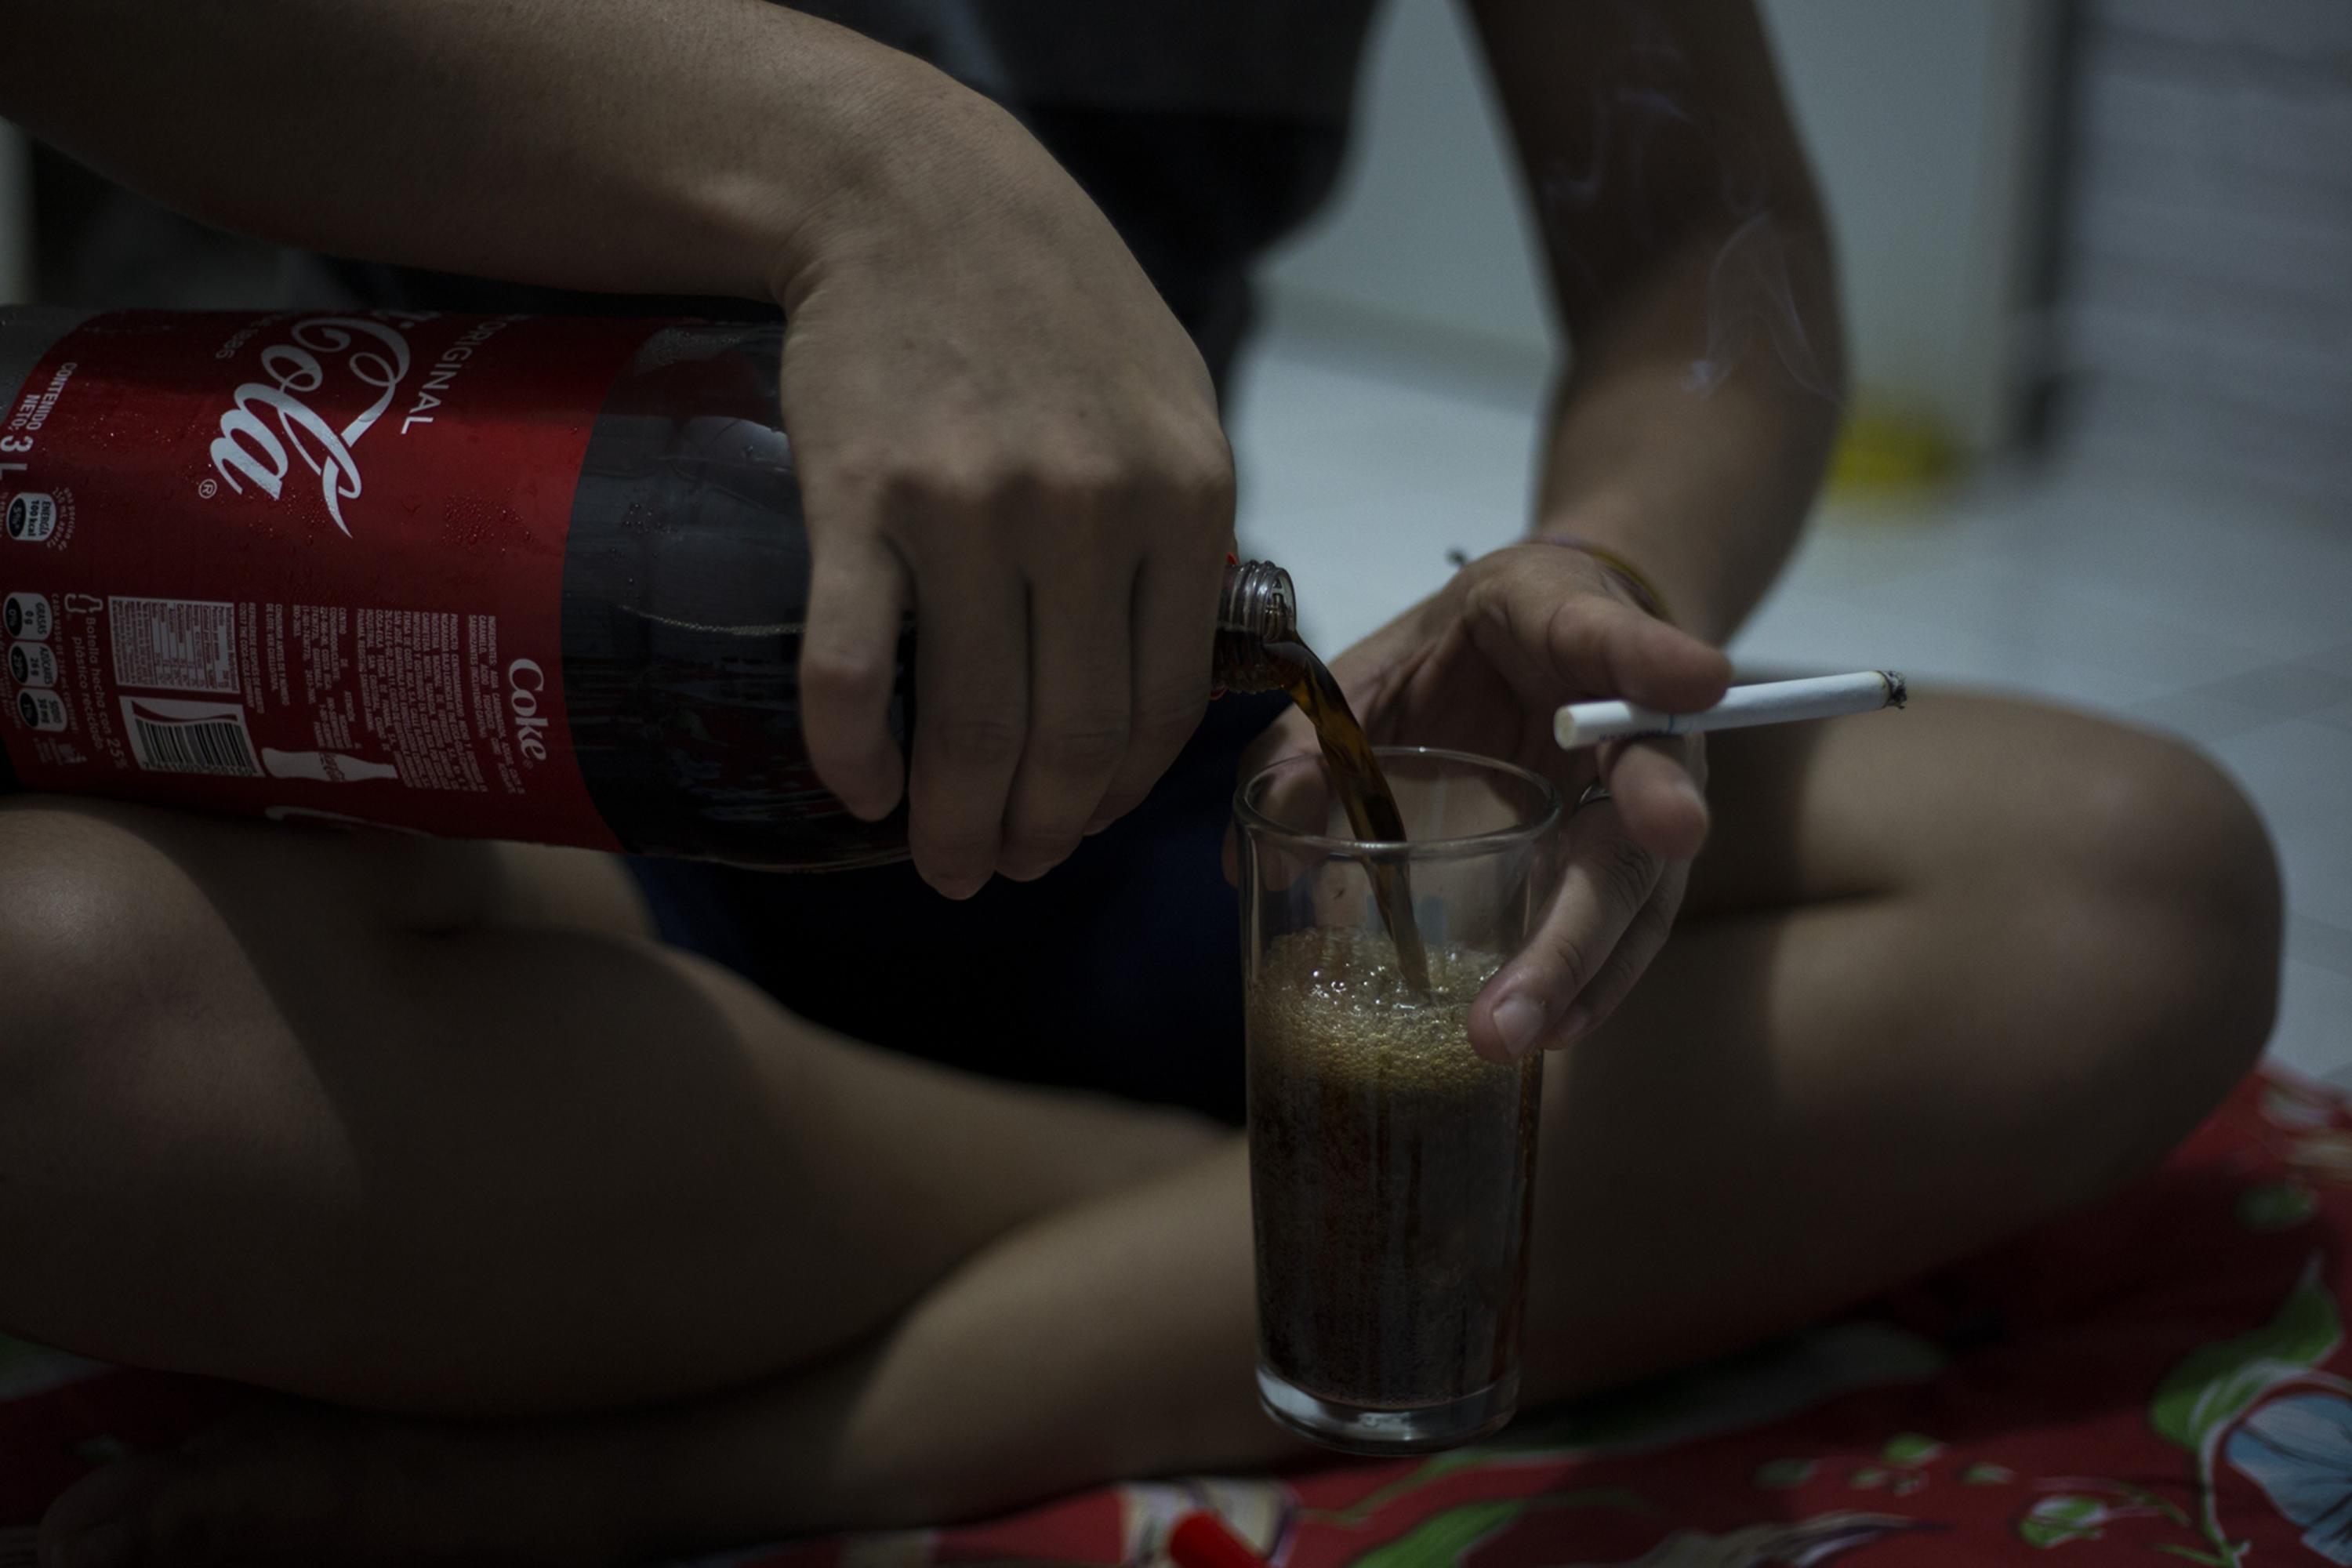 Doctor Veneno,one of those taking refuge in the safe house, pours himself a glass of Coke and lights a cigarette to speak with his student comrades, as they often do to pass the time. Photo Víctor Peña